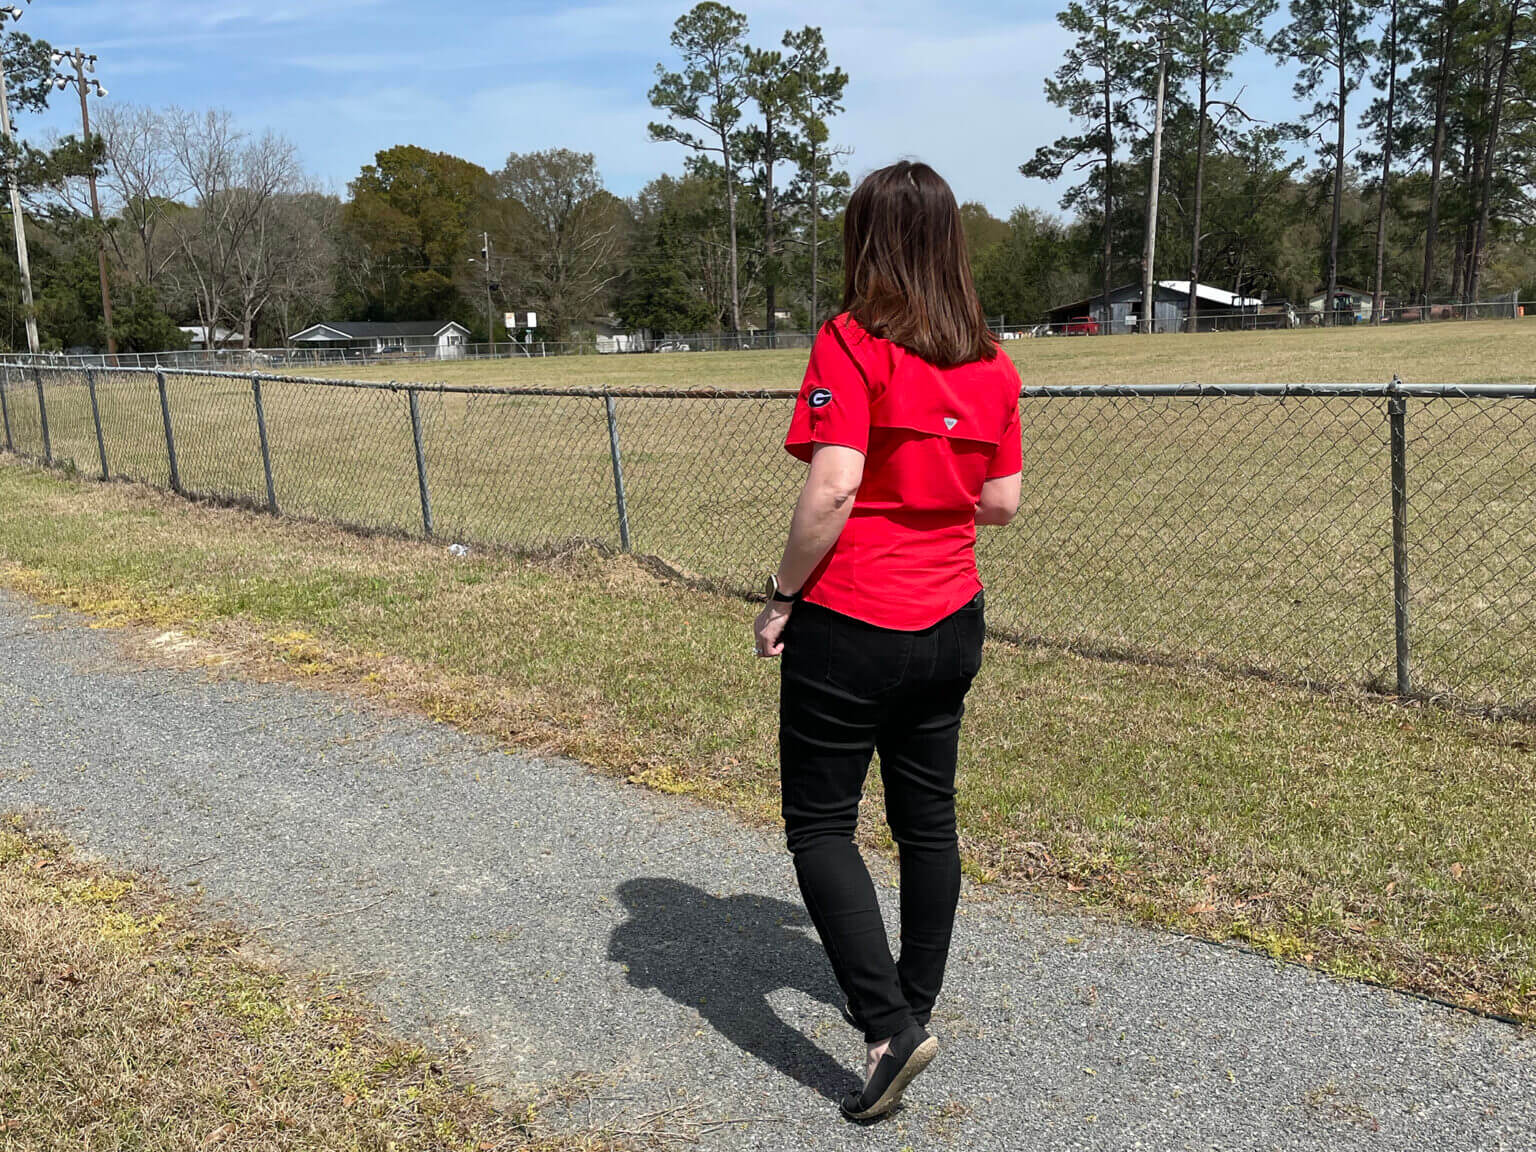 In many rural Georgia communities, there are few safe routes, away from high-traffic areas, that allow opportunities for physical activity. Without this infrastructure, walking in the community can be unsafe and difficult.